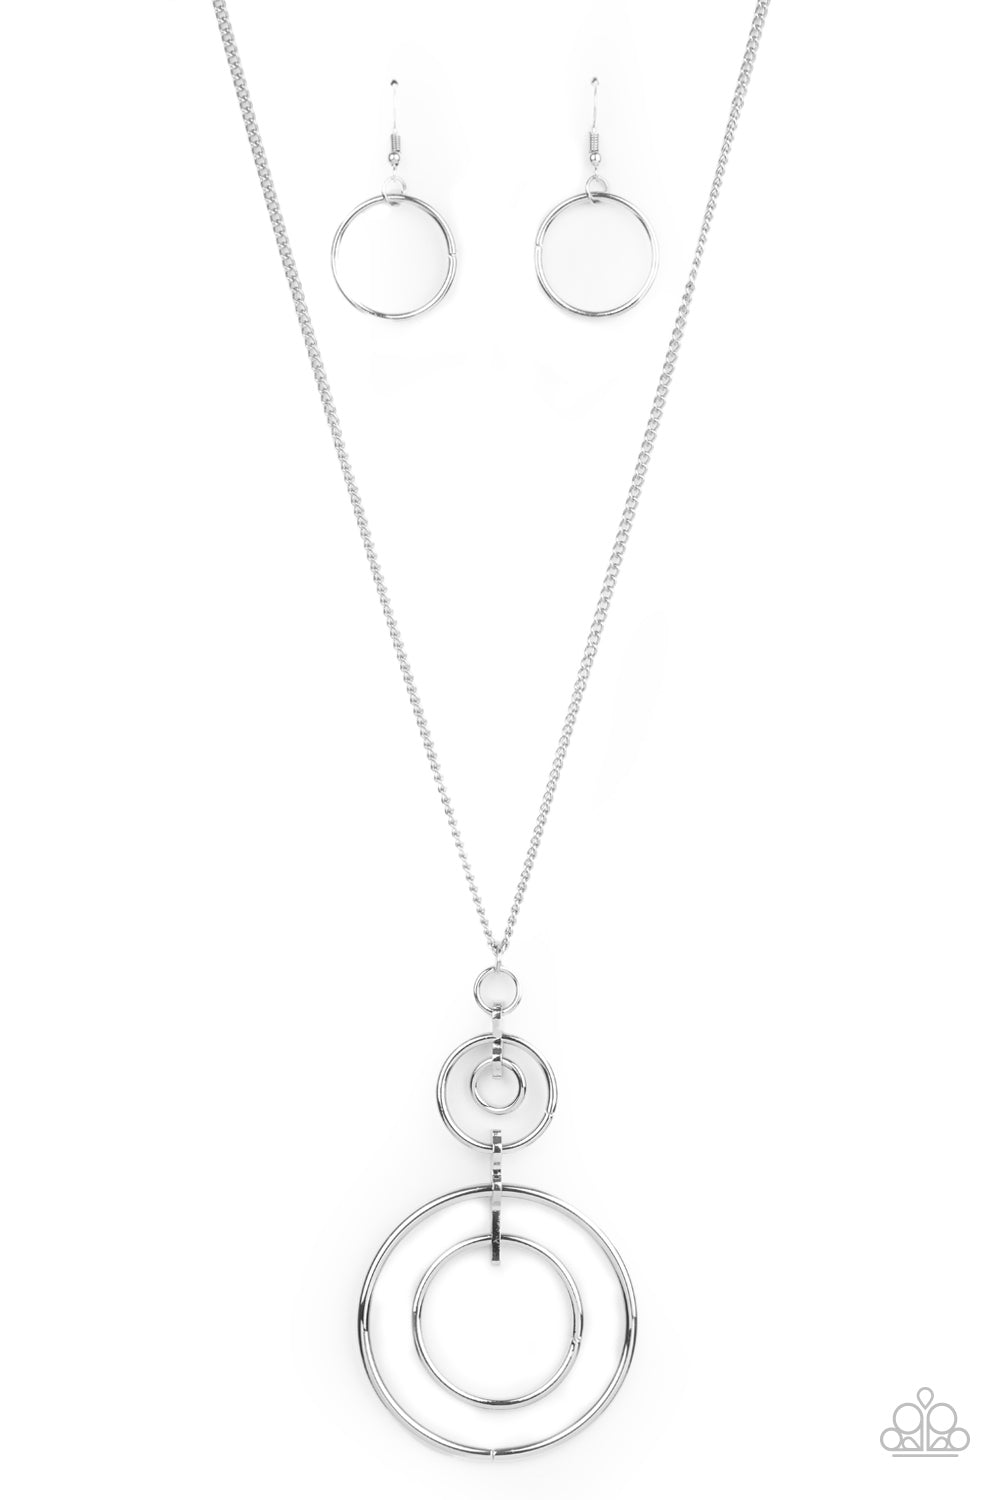 The Inner Workings - Silver Necklace Set - Princess Glam Shop